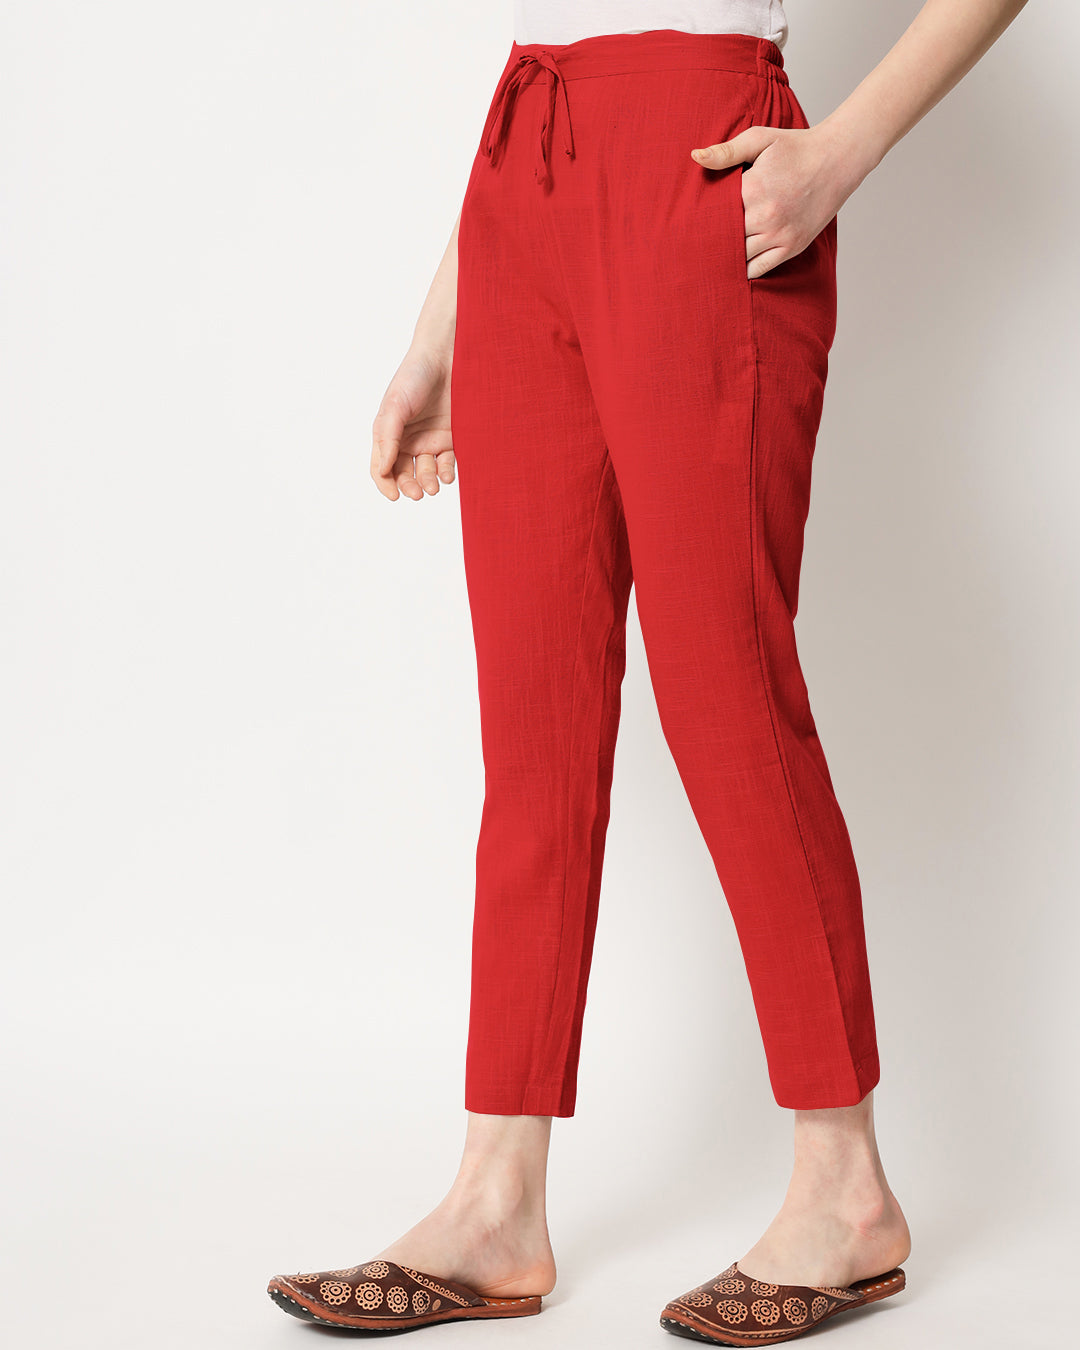 Classic Red Cigarette Pants